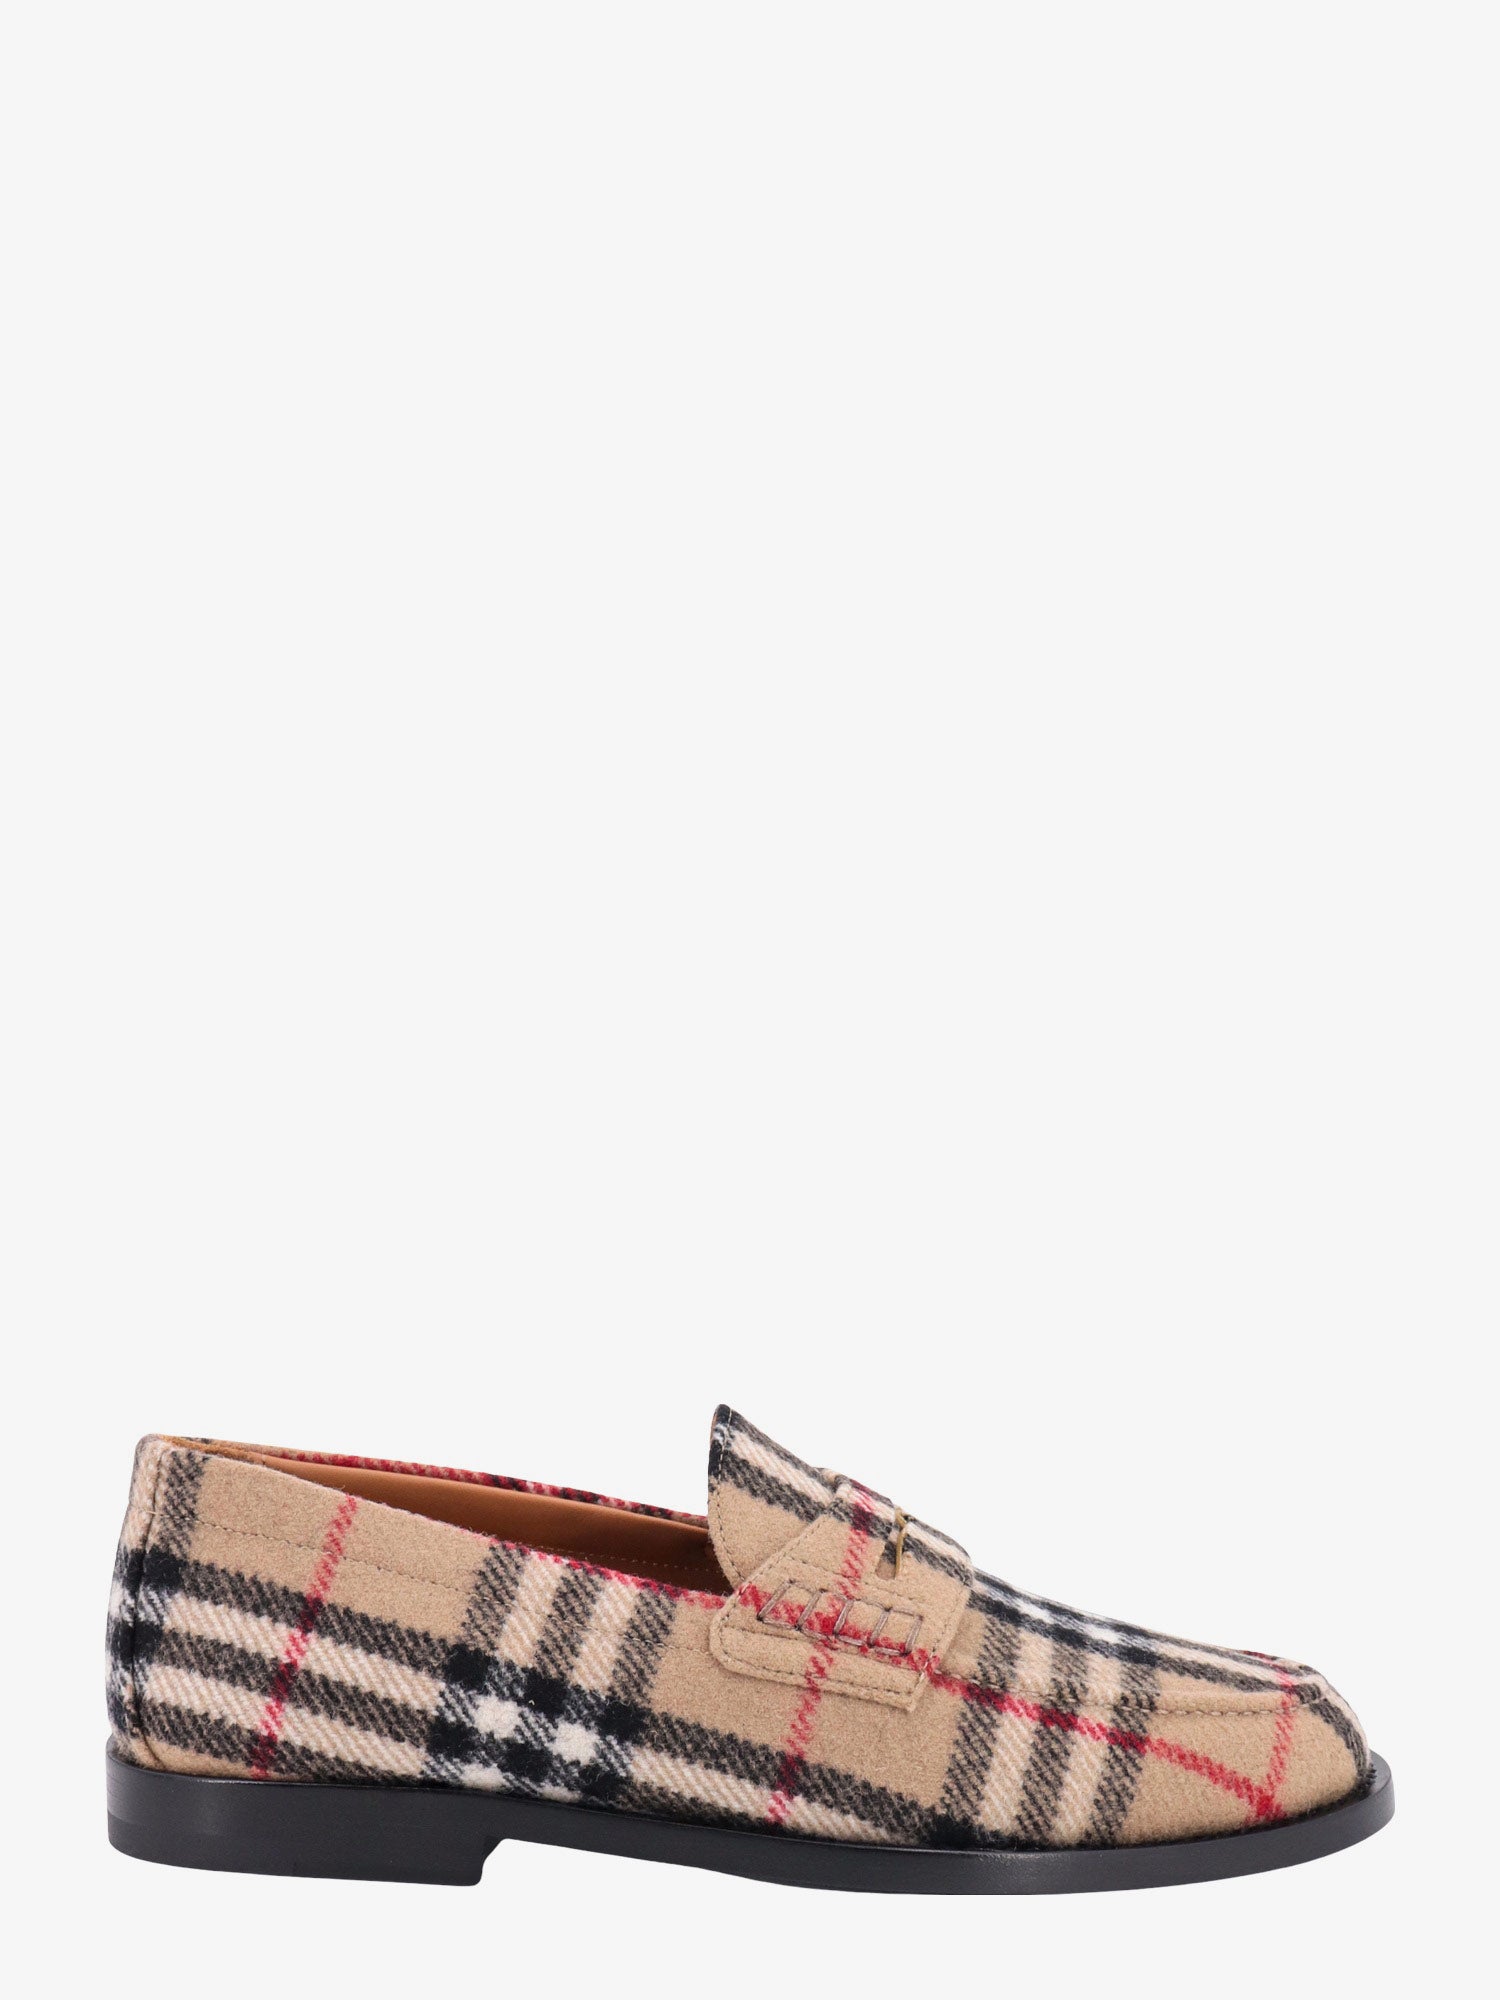 burberry loafer - woman